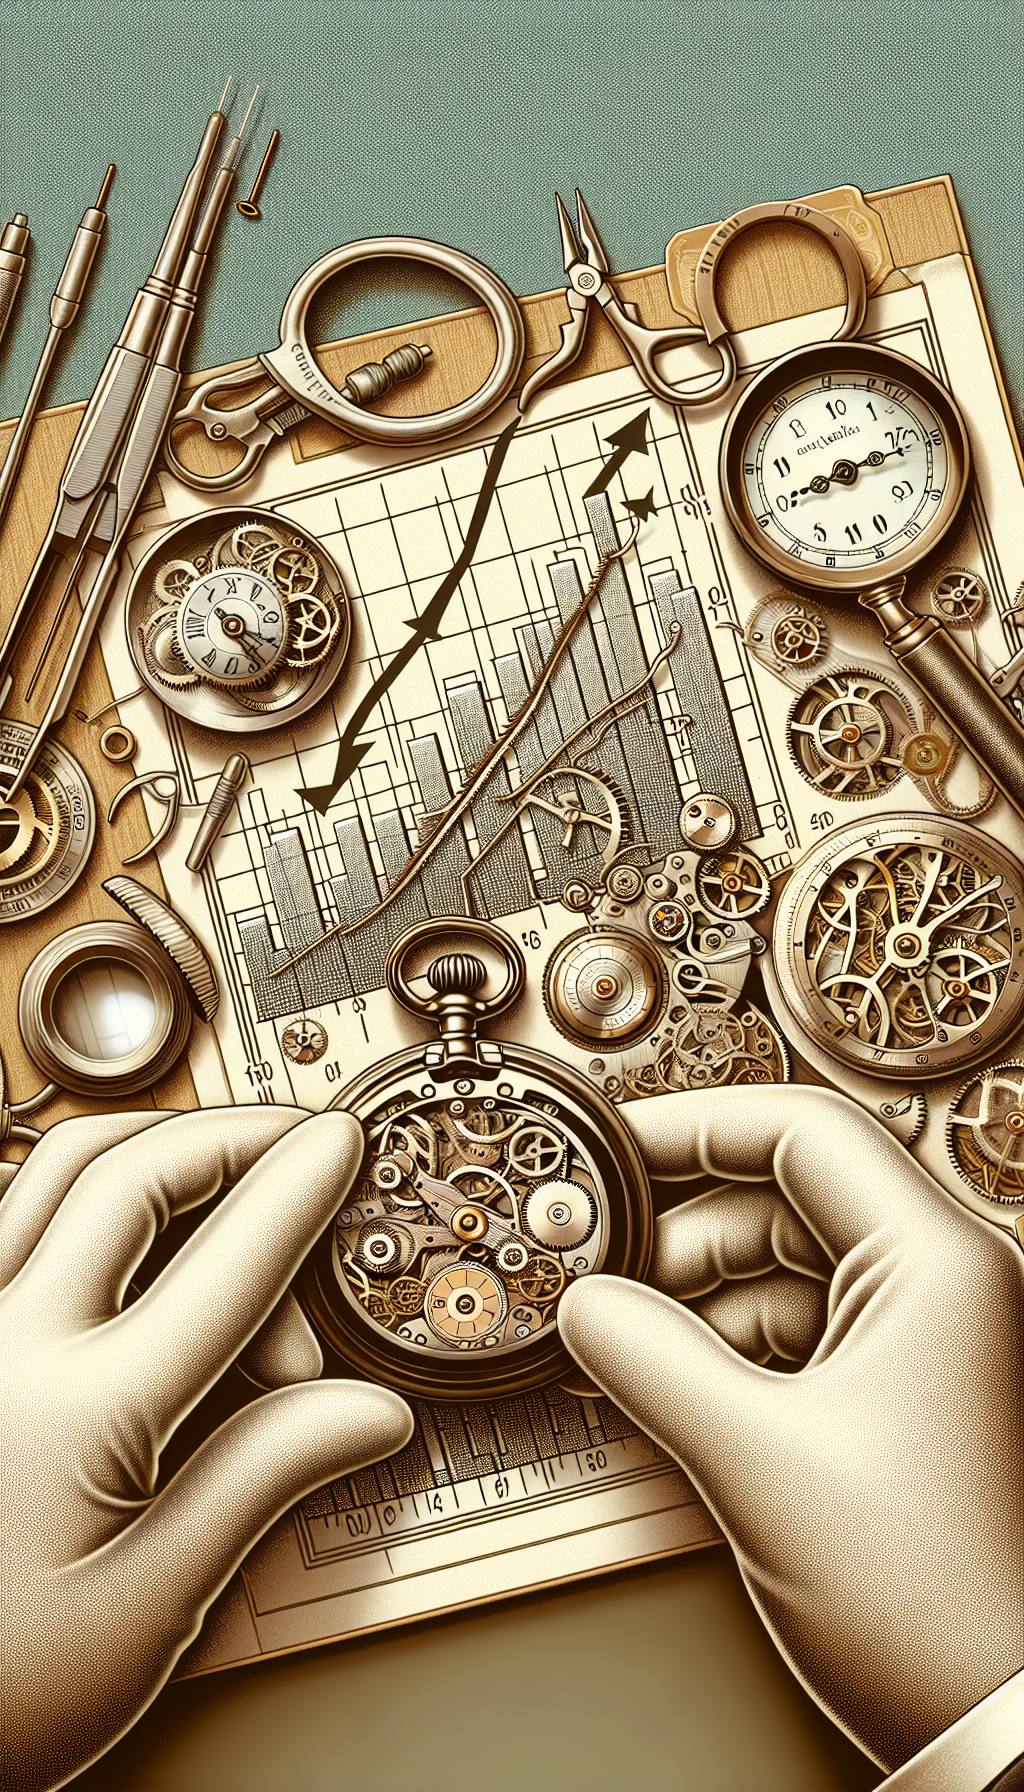 An illustration featuring a classic Lady Elgin pocket watch partially disassembled, with miniature tools and a magnifying glass around it. Careful hands with delicate gloves are applying subtle restorative actions, symbolizing precise maintenance. A rising graph made of clock gears in the background suggests increasing value, while the watch's intricate designs echo its esteemed heritage and emphasize its antique worth.